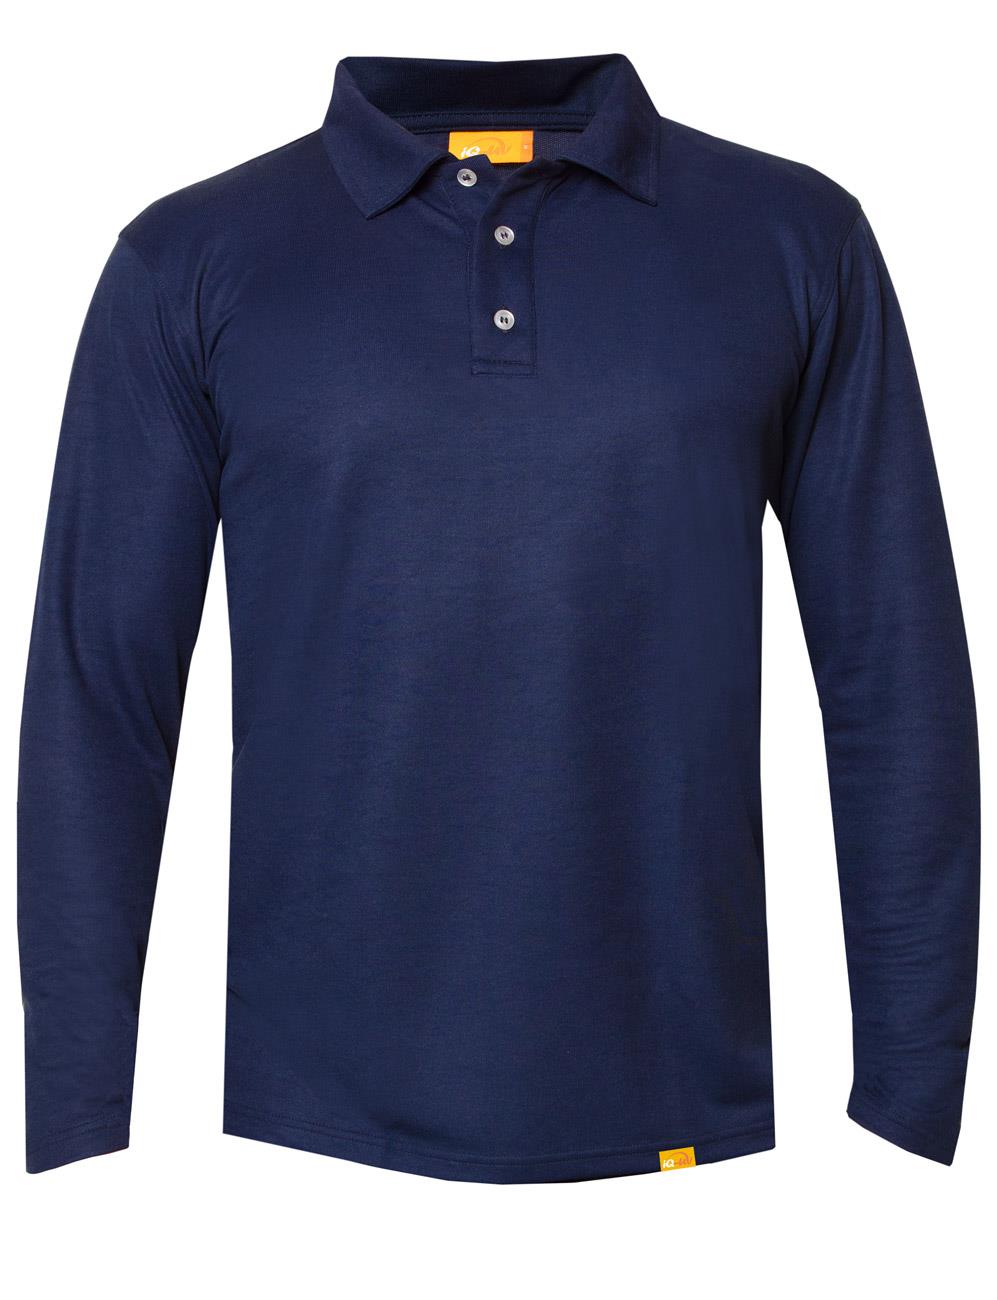 iQ UV UPF 50+ recycled sustainably sourced navy men's long-sleeved polo-shirt